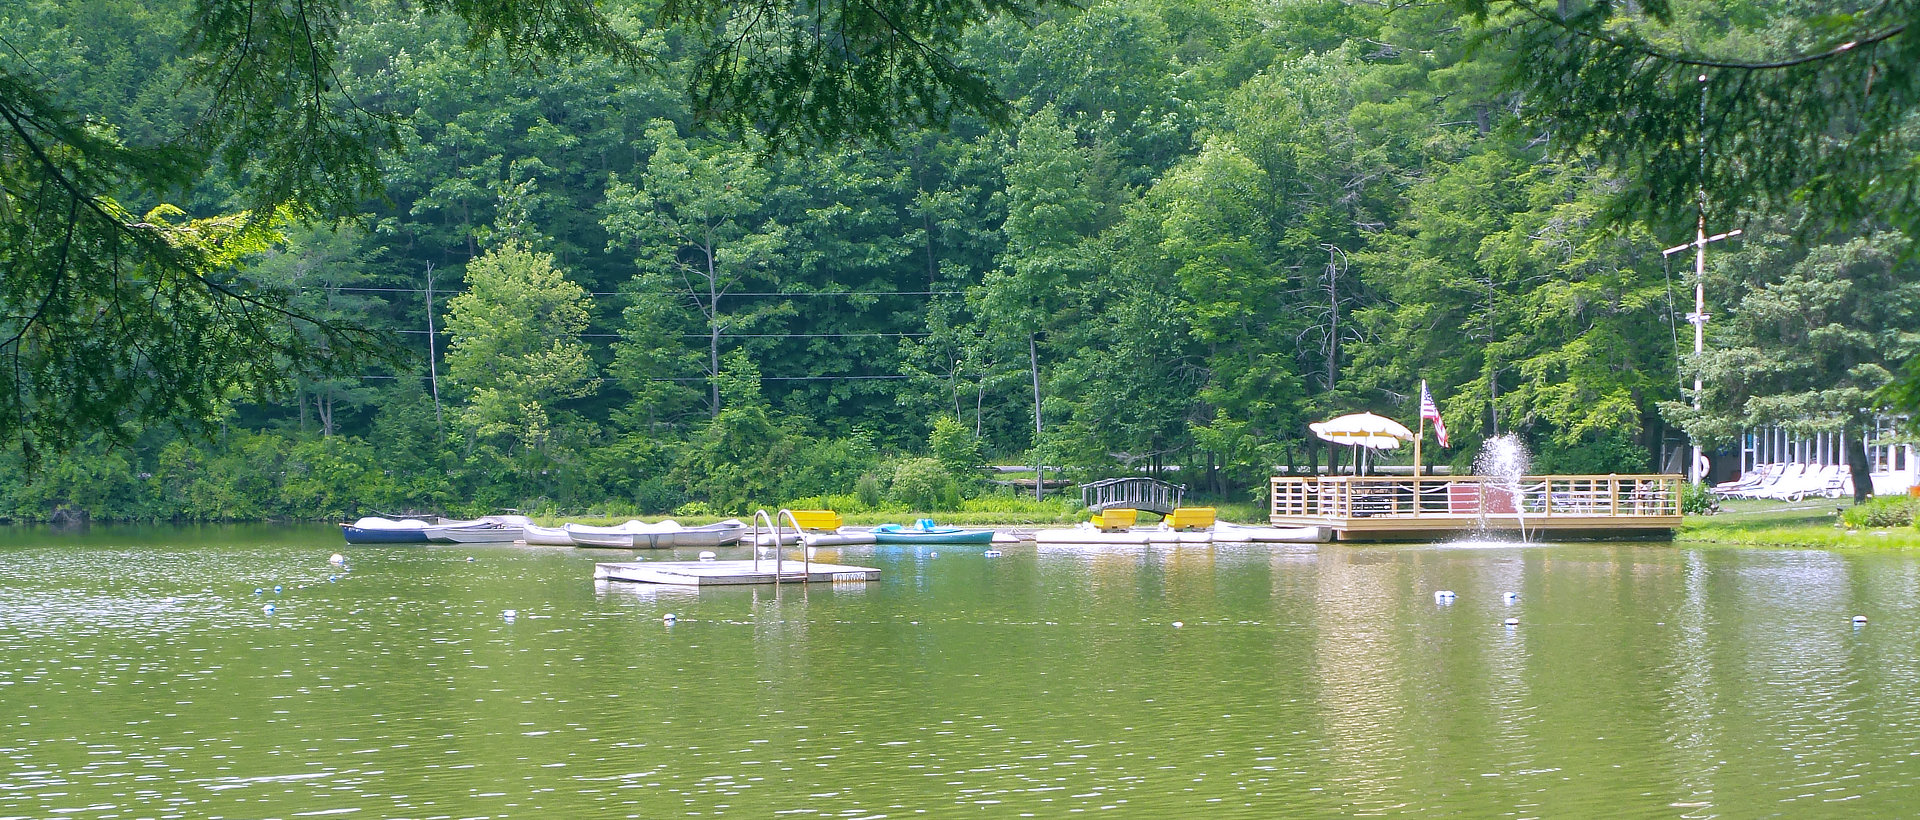 A look across the lake at Lakeside Campground